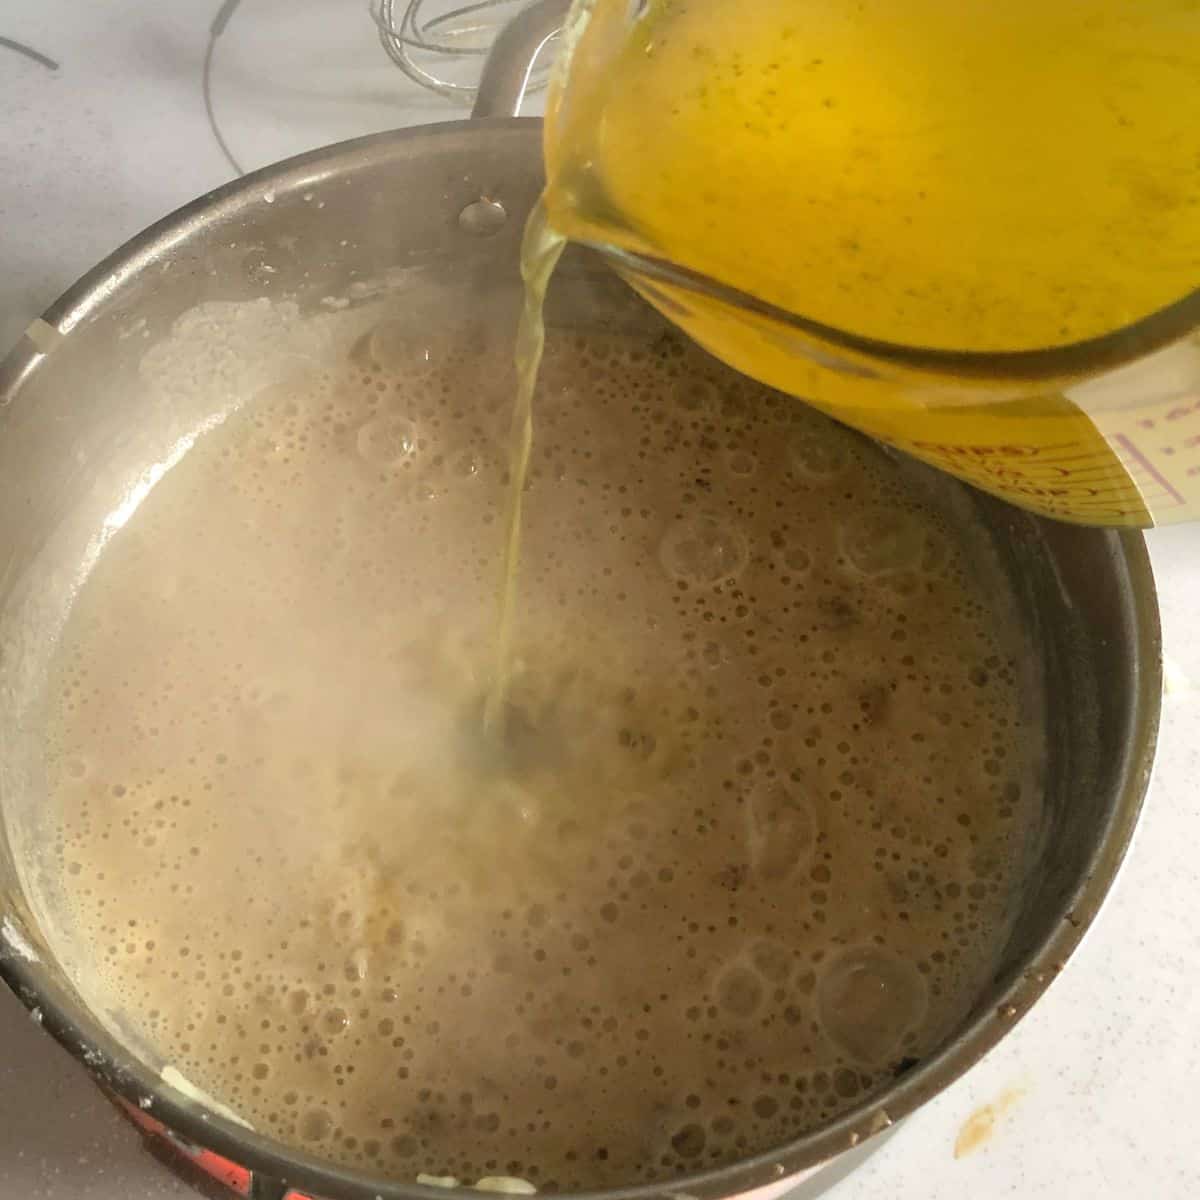 Chicken broth being whisked into the gluten free flour and dairy free butter mixture.